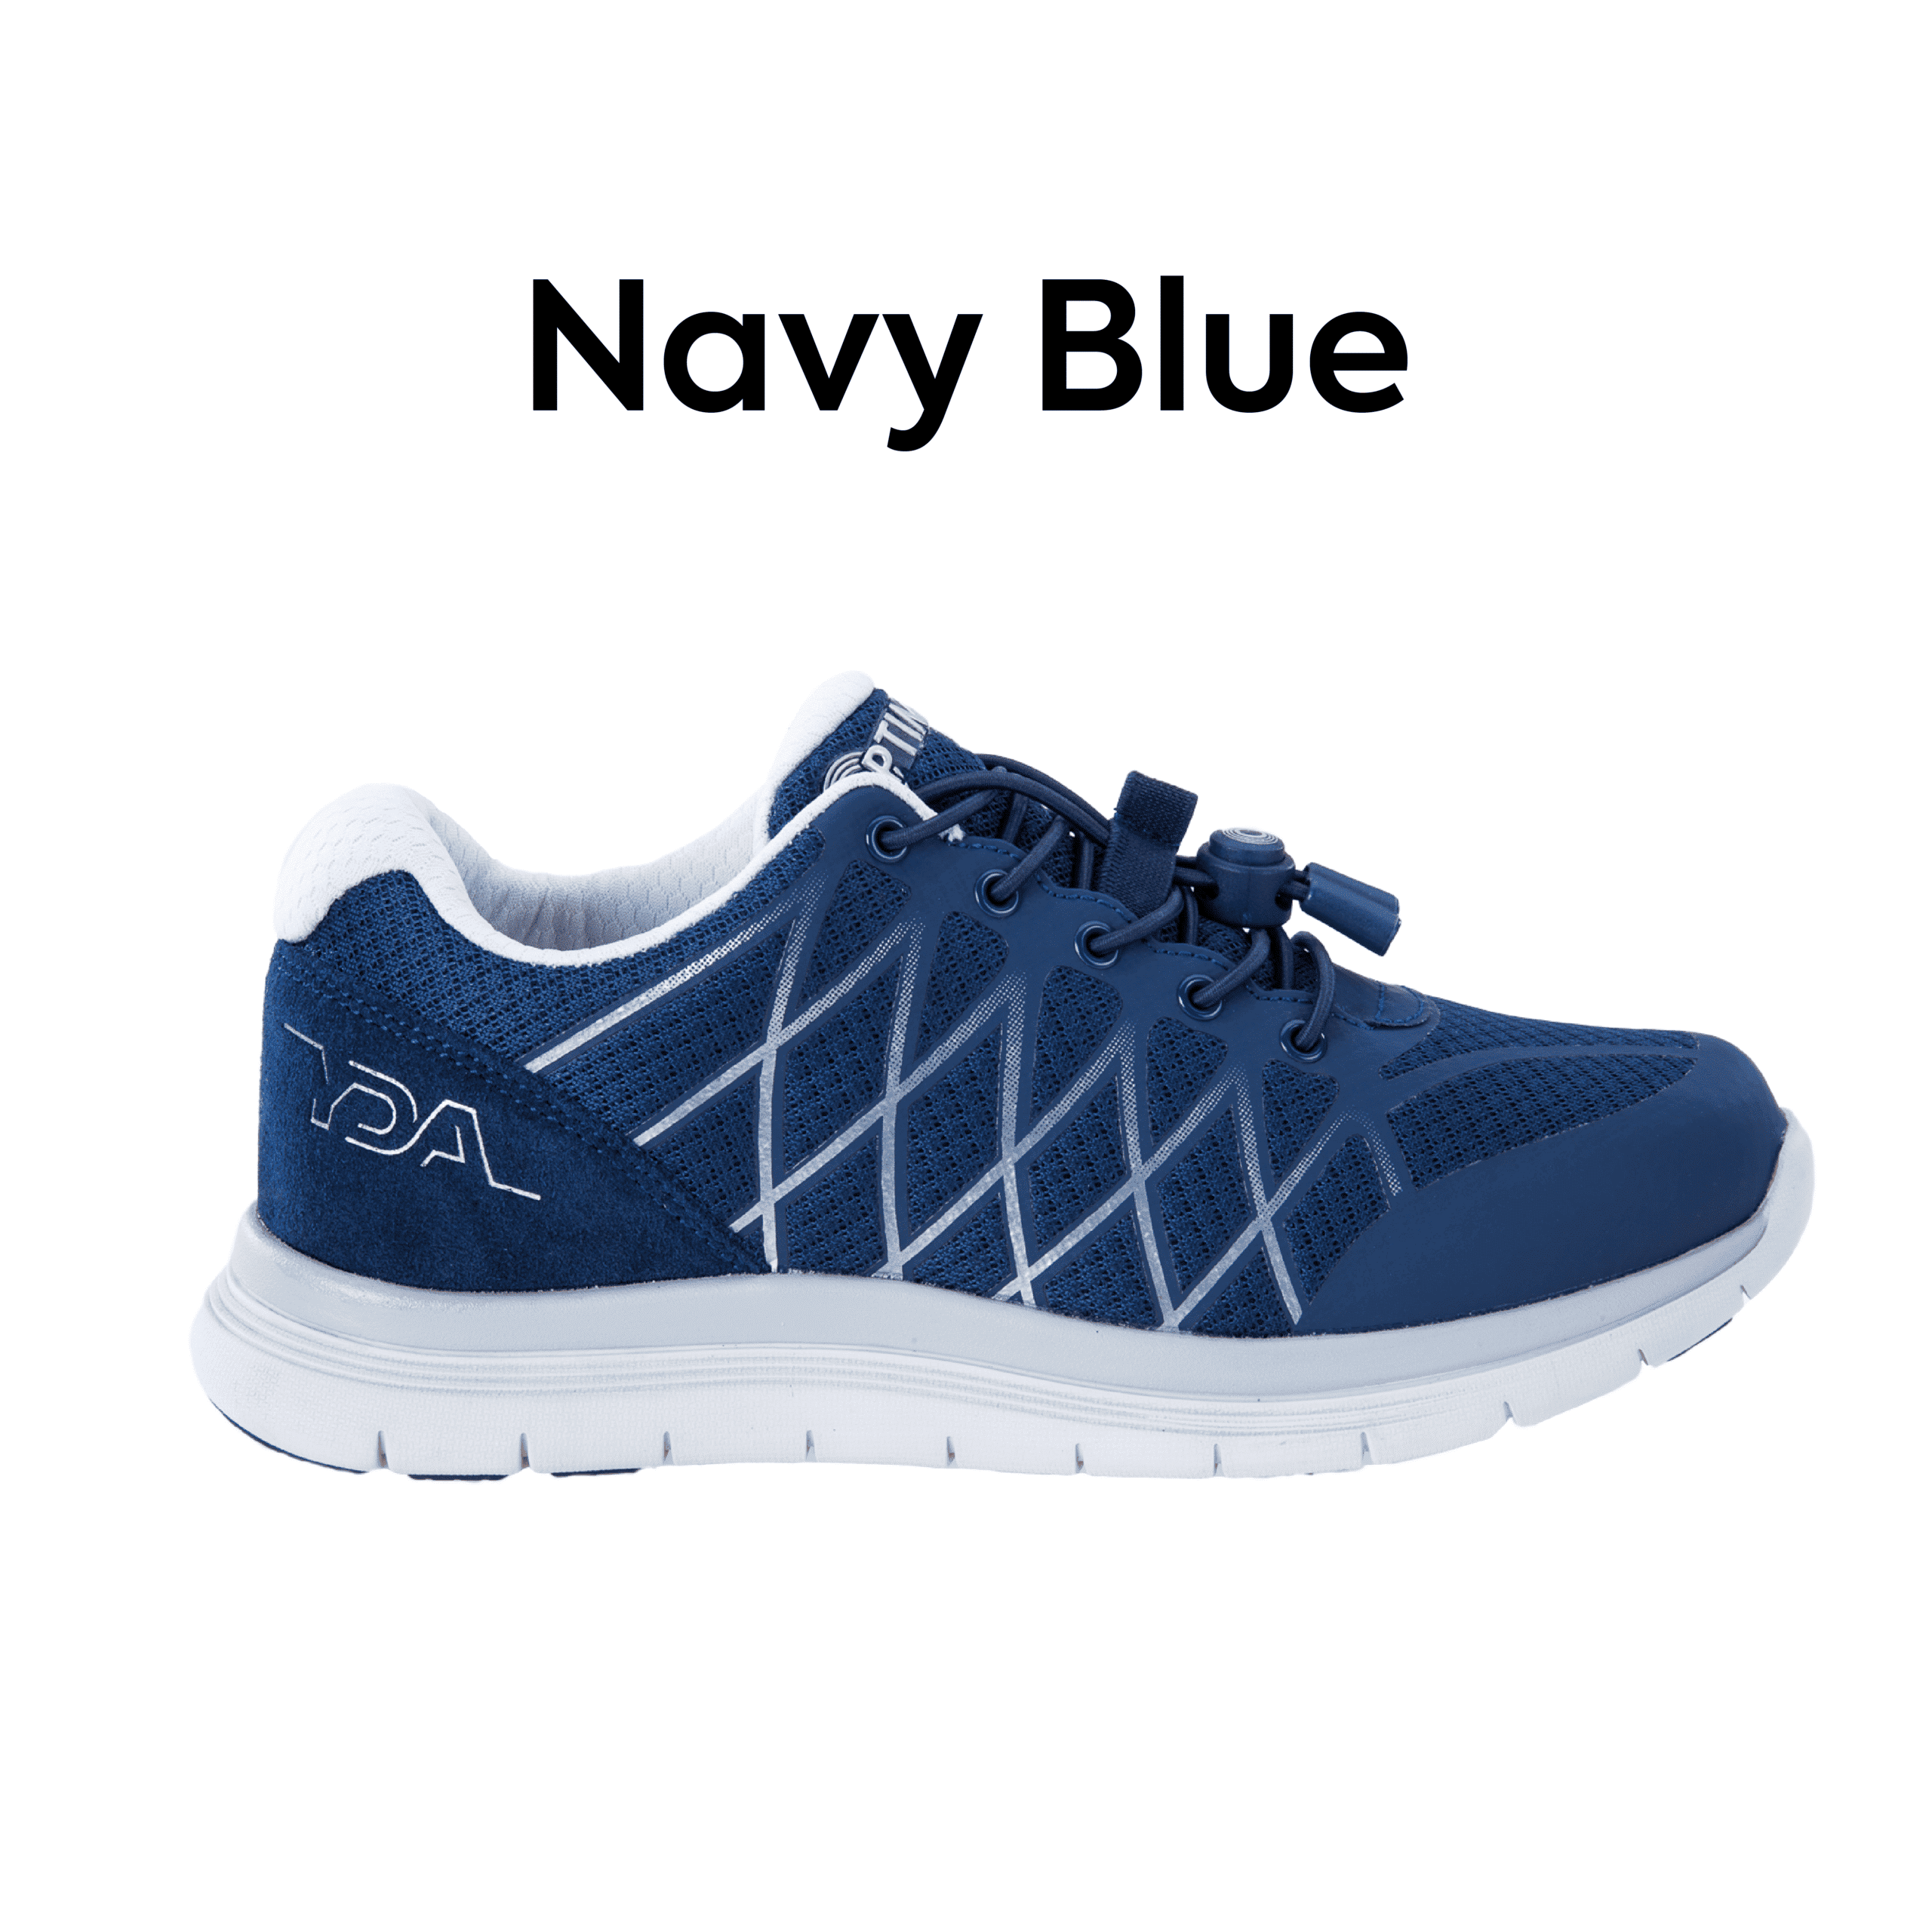 20220401_all YDA shoes_navy blue